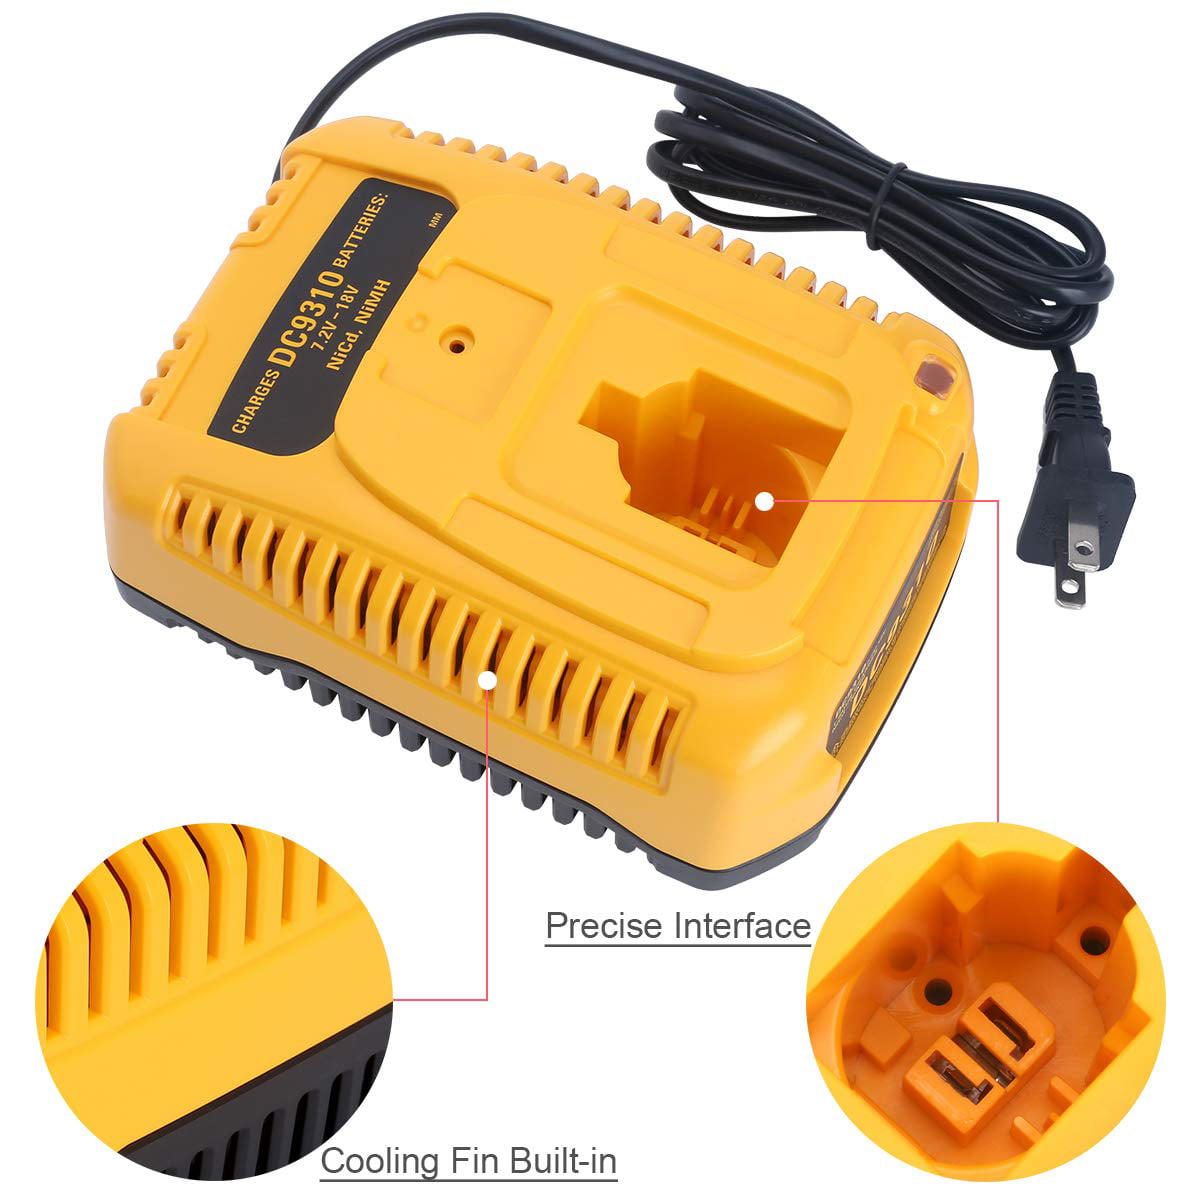 Maximalpower Battery Charger for DeWalt and Elu Power Tool Ni-CD Ni-MH Batteries 7.2-18 Volts (Charger Only)